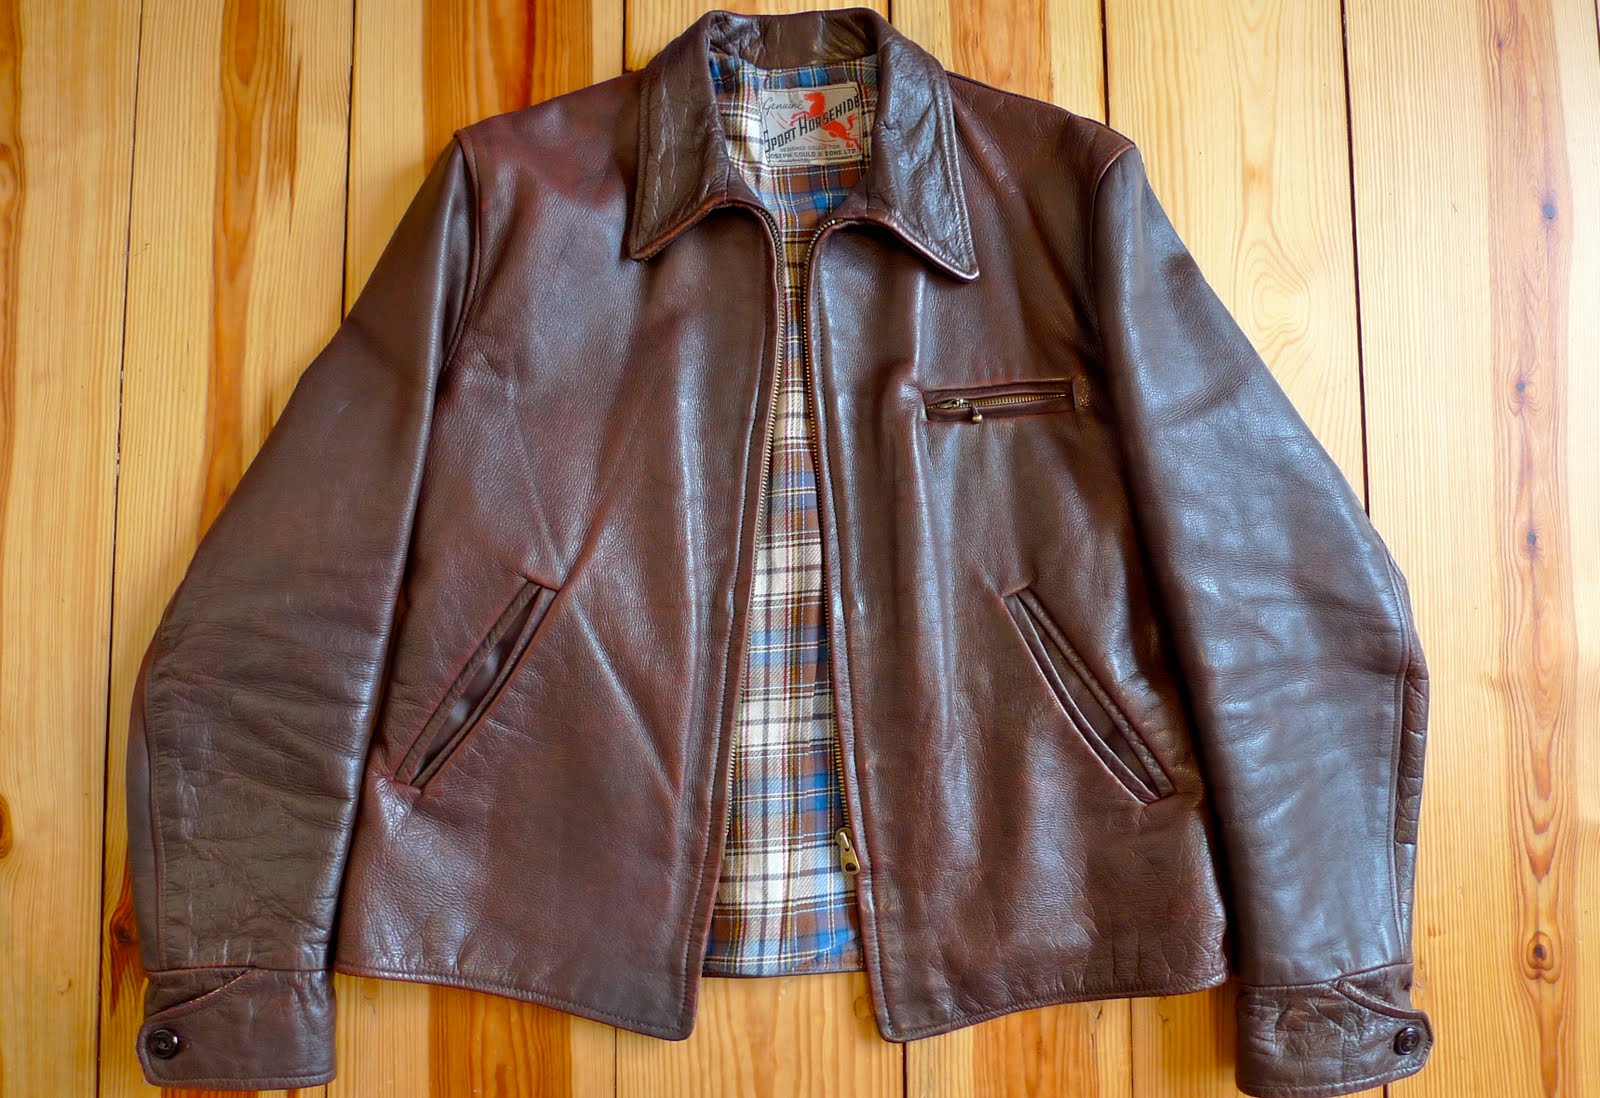 The Art of Vintage Leather Jackets: Friday, April 16, 2010